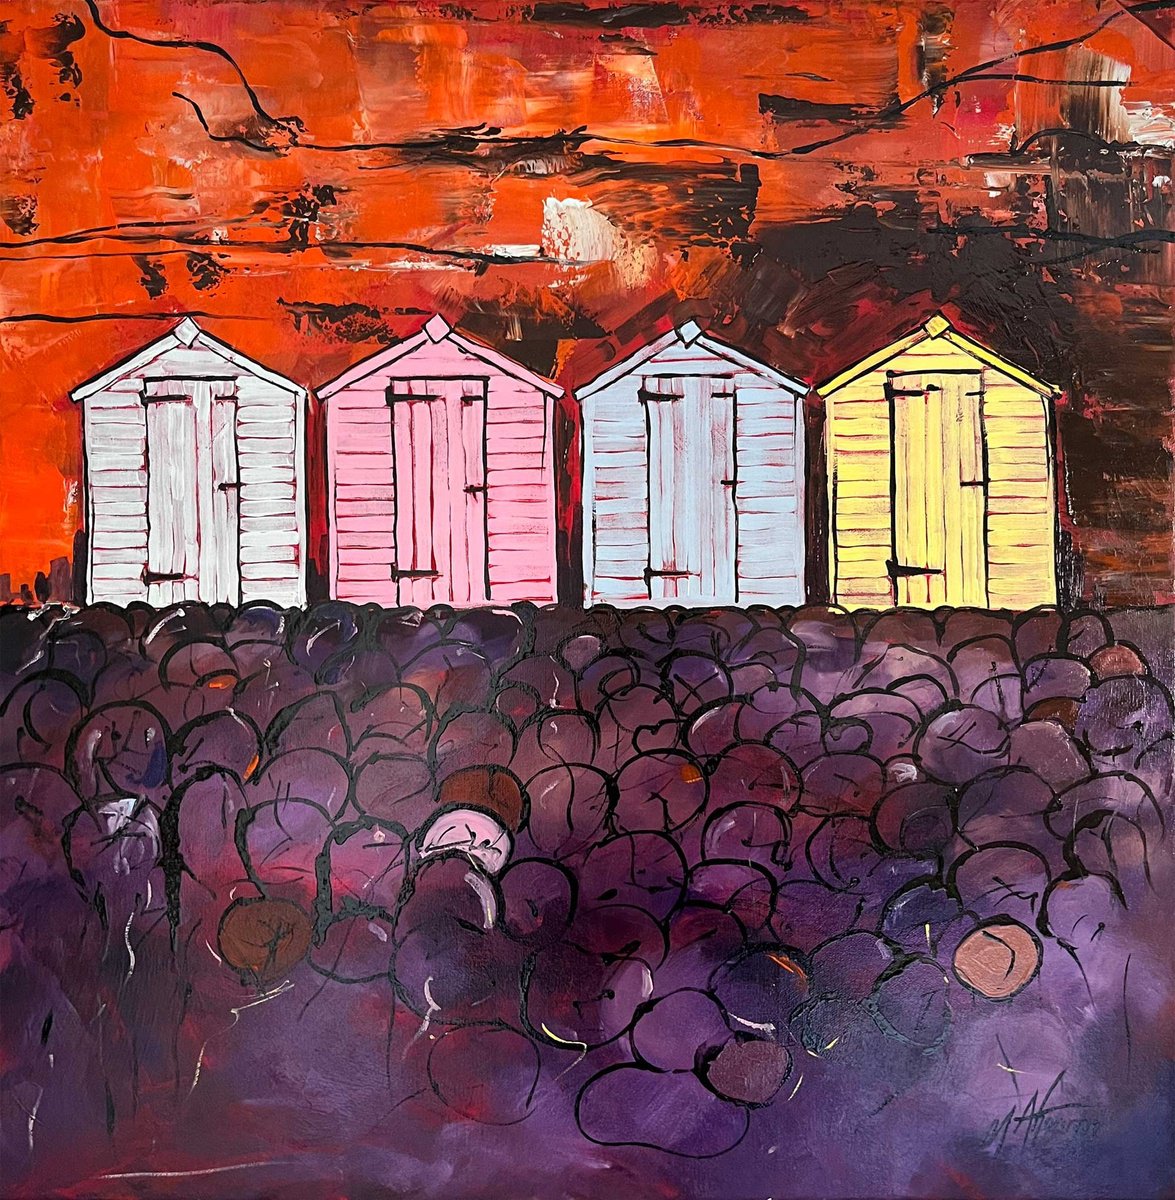 Beach Huts. An Original Oil Painting on Canvas by Michael Ahearne